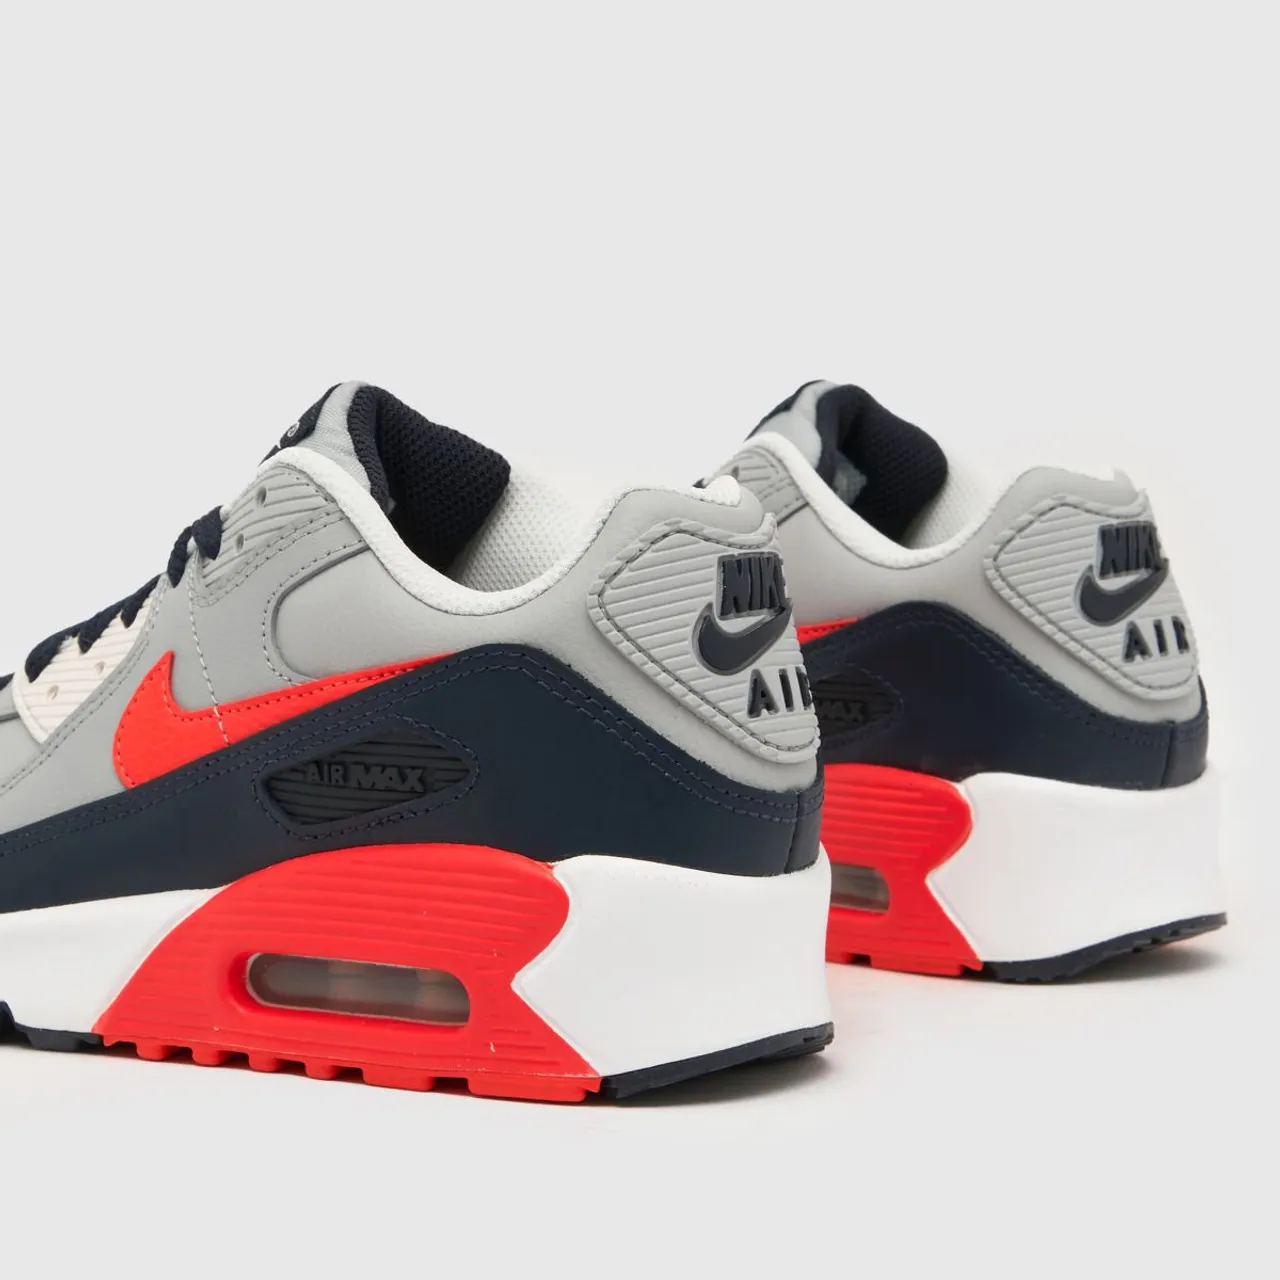 Nike Navy & Grey Air Max 90 Ltr Boys Youth Trainers